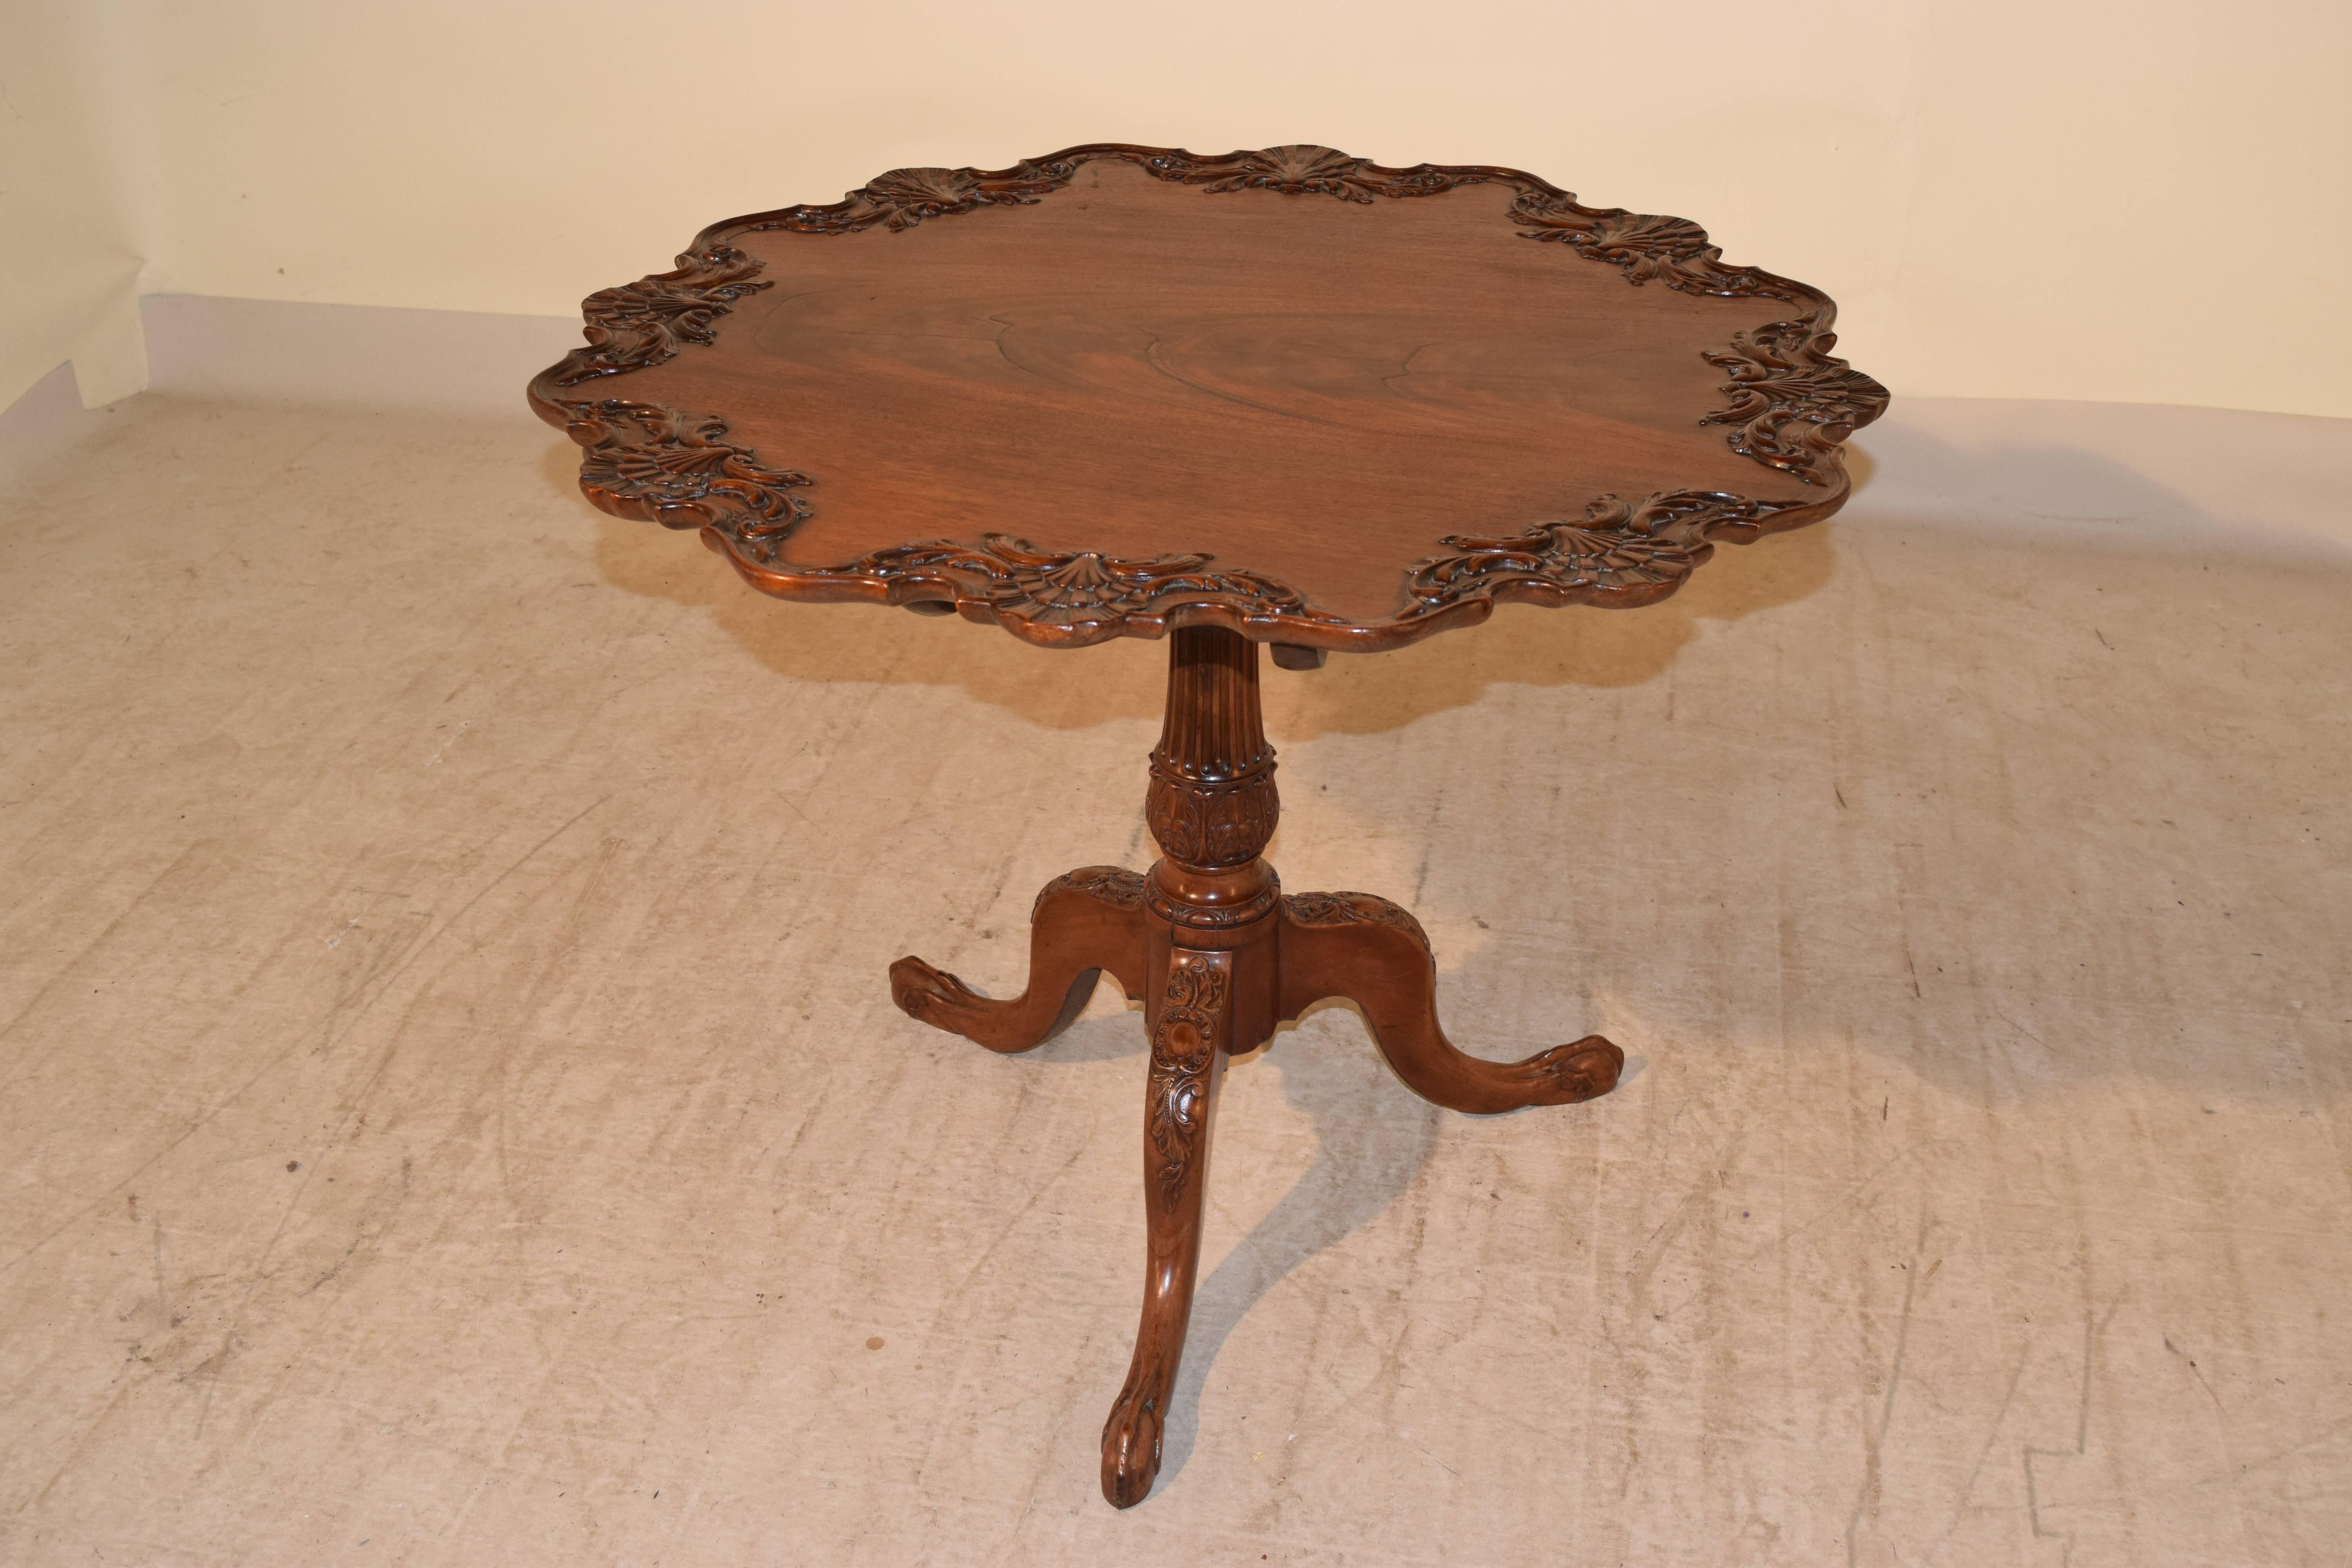 18th century Irish tea table made from mahogany. The top has a wonderfully scalloped and hand-carved edge with shell decoration. The top has gorgeous figured wood as well. The base is a birdcage on a turned and carved pedestal, supported on three